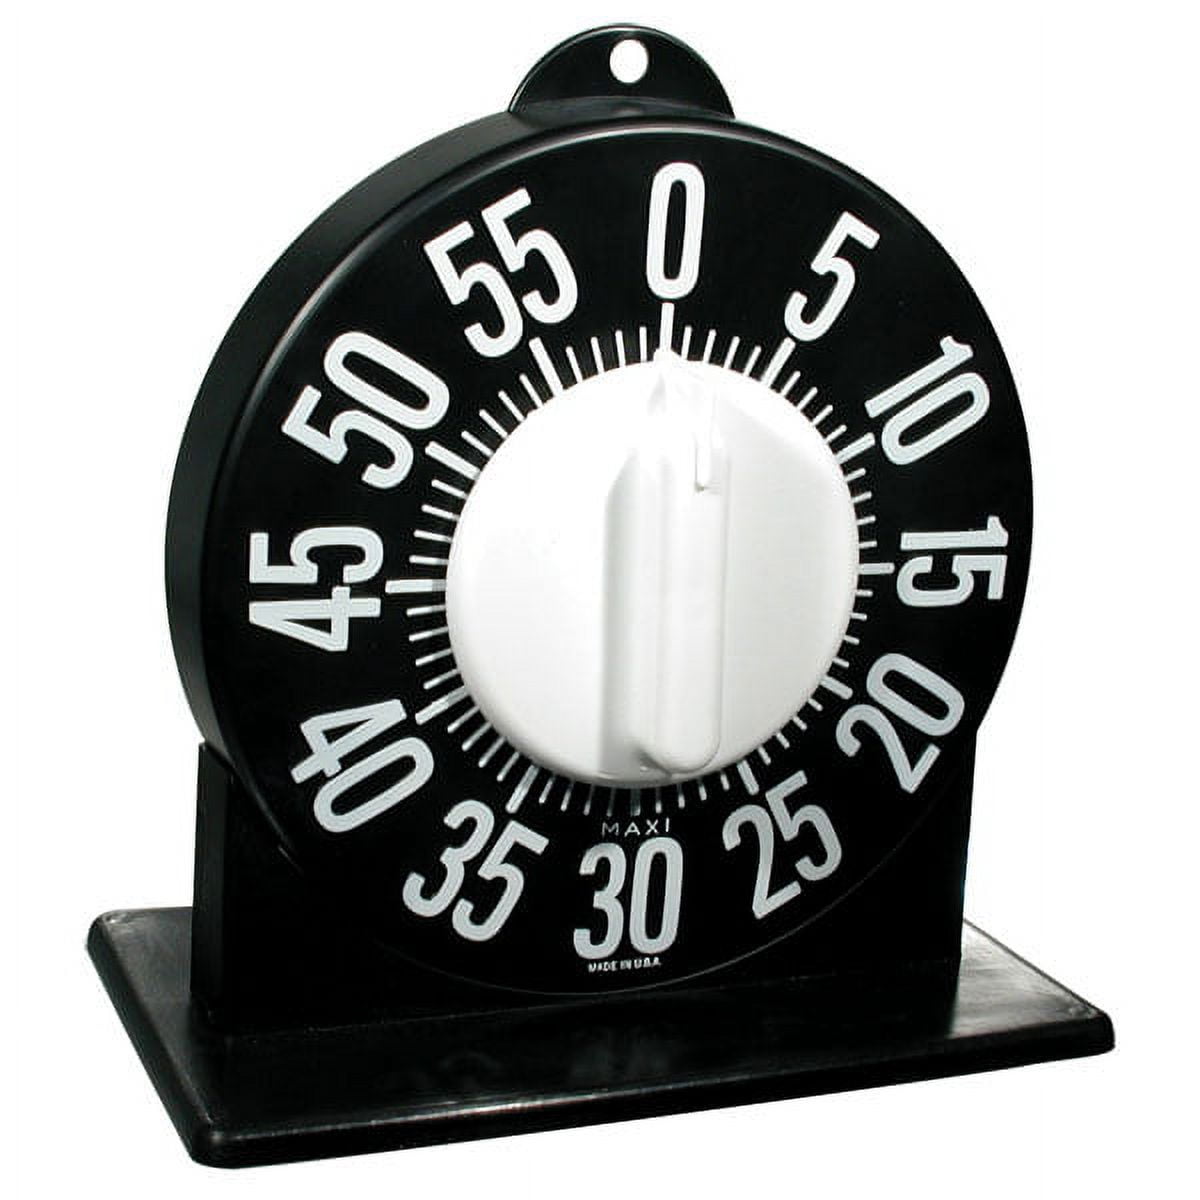 Extra Large Tactile Magnetic Kitchen Timer- White with Black Dial